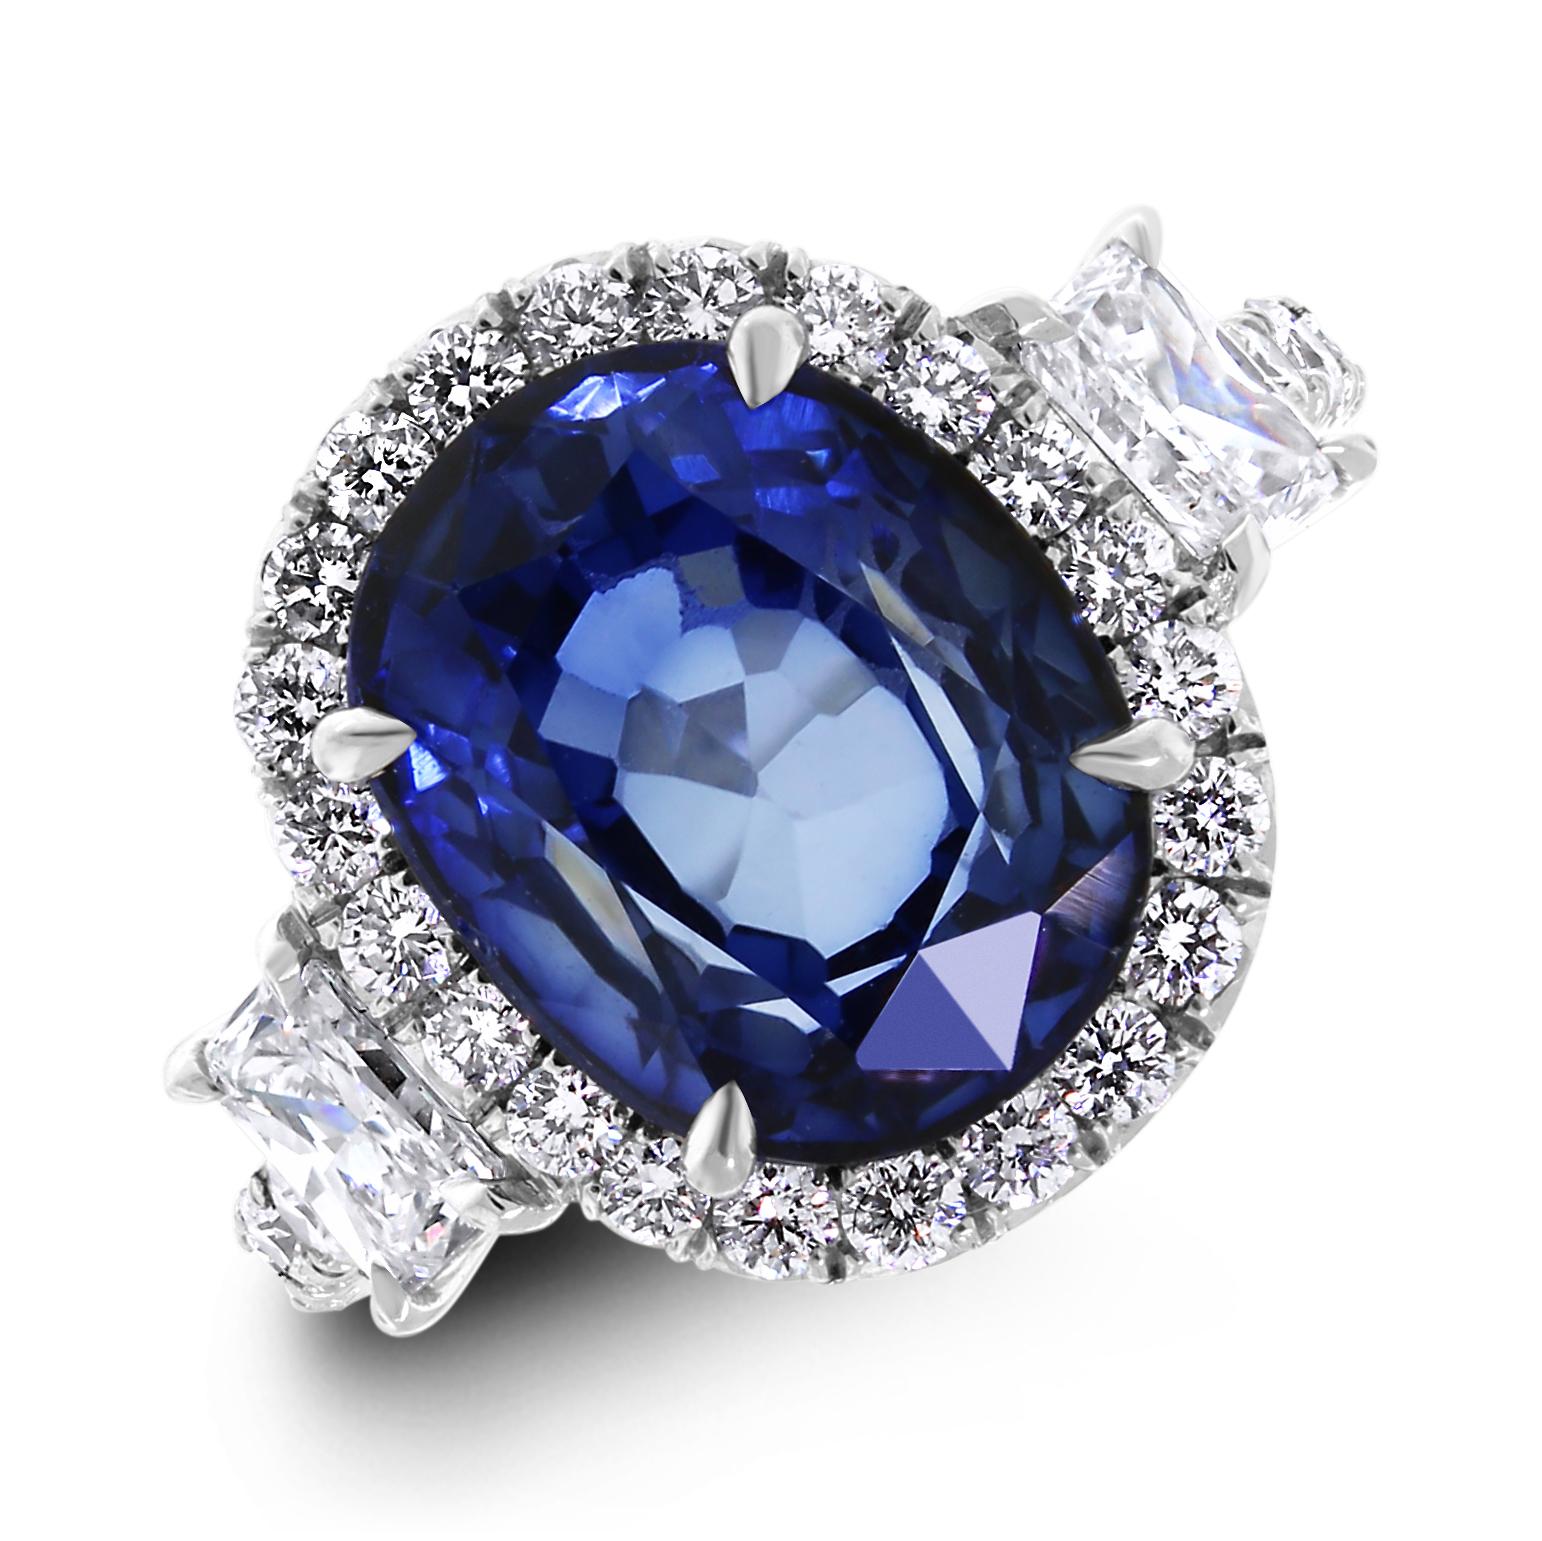 An enviable jewel, this ring sports some dazzling Diamonds & a sparkling Sapphire. 

Gemstones Type: Sapphire 
Gemstones Shape: Oval 
Gemstones Weight: 5.92 ct
Gemstones Color: Blue 

Diamonds Shape: Round & Radiant 
Side Diamonds Weight: 1.75 ct